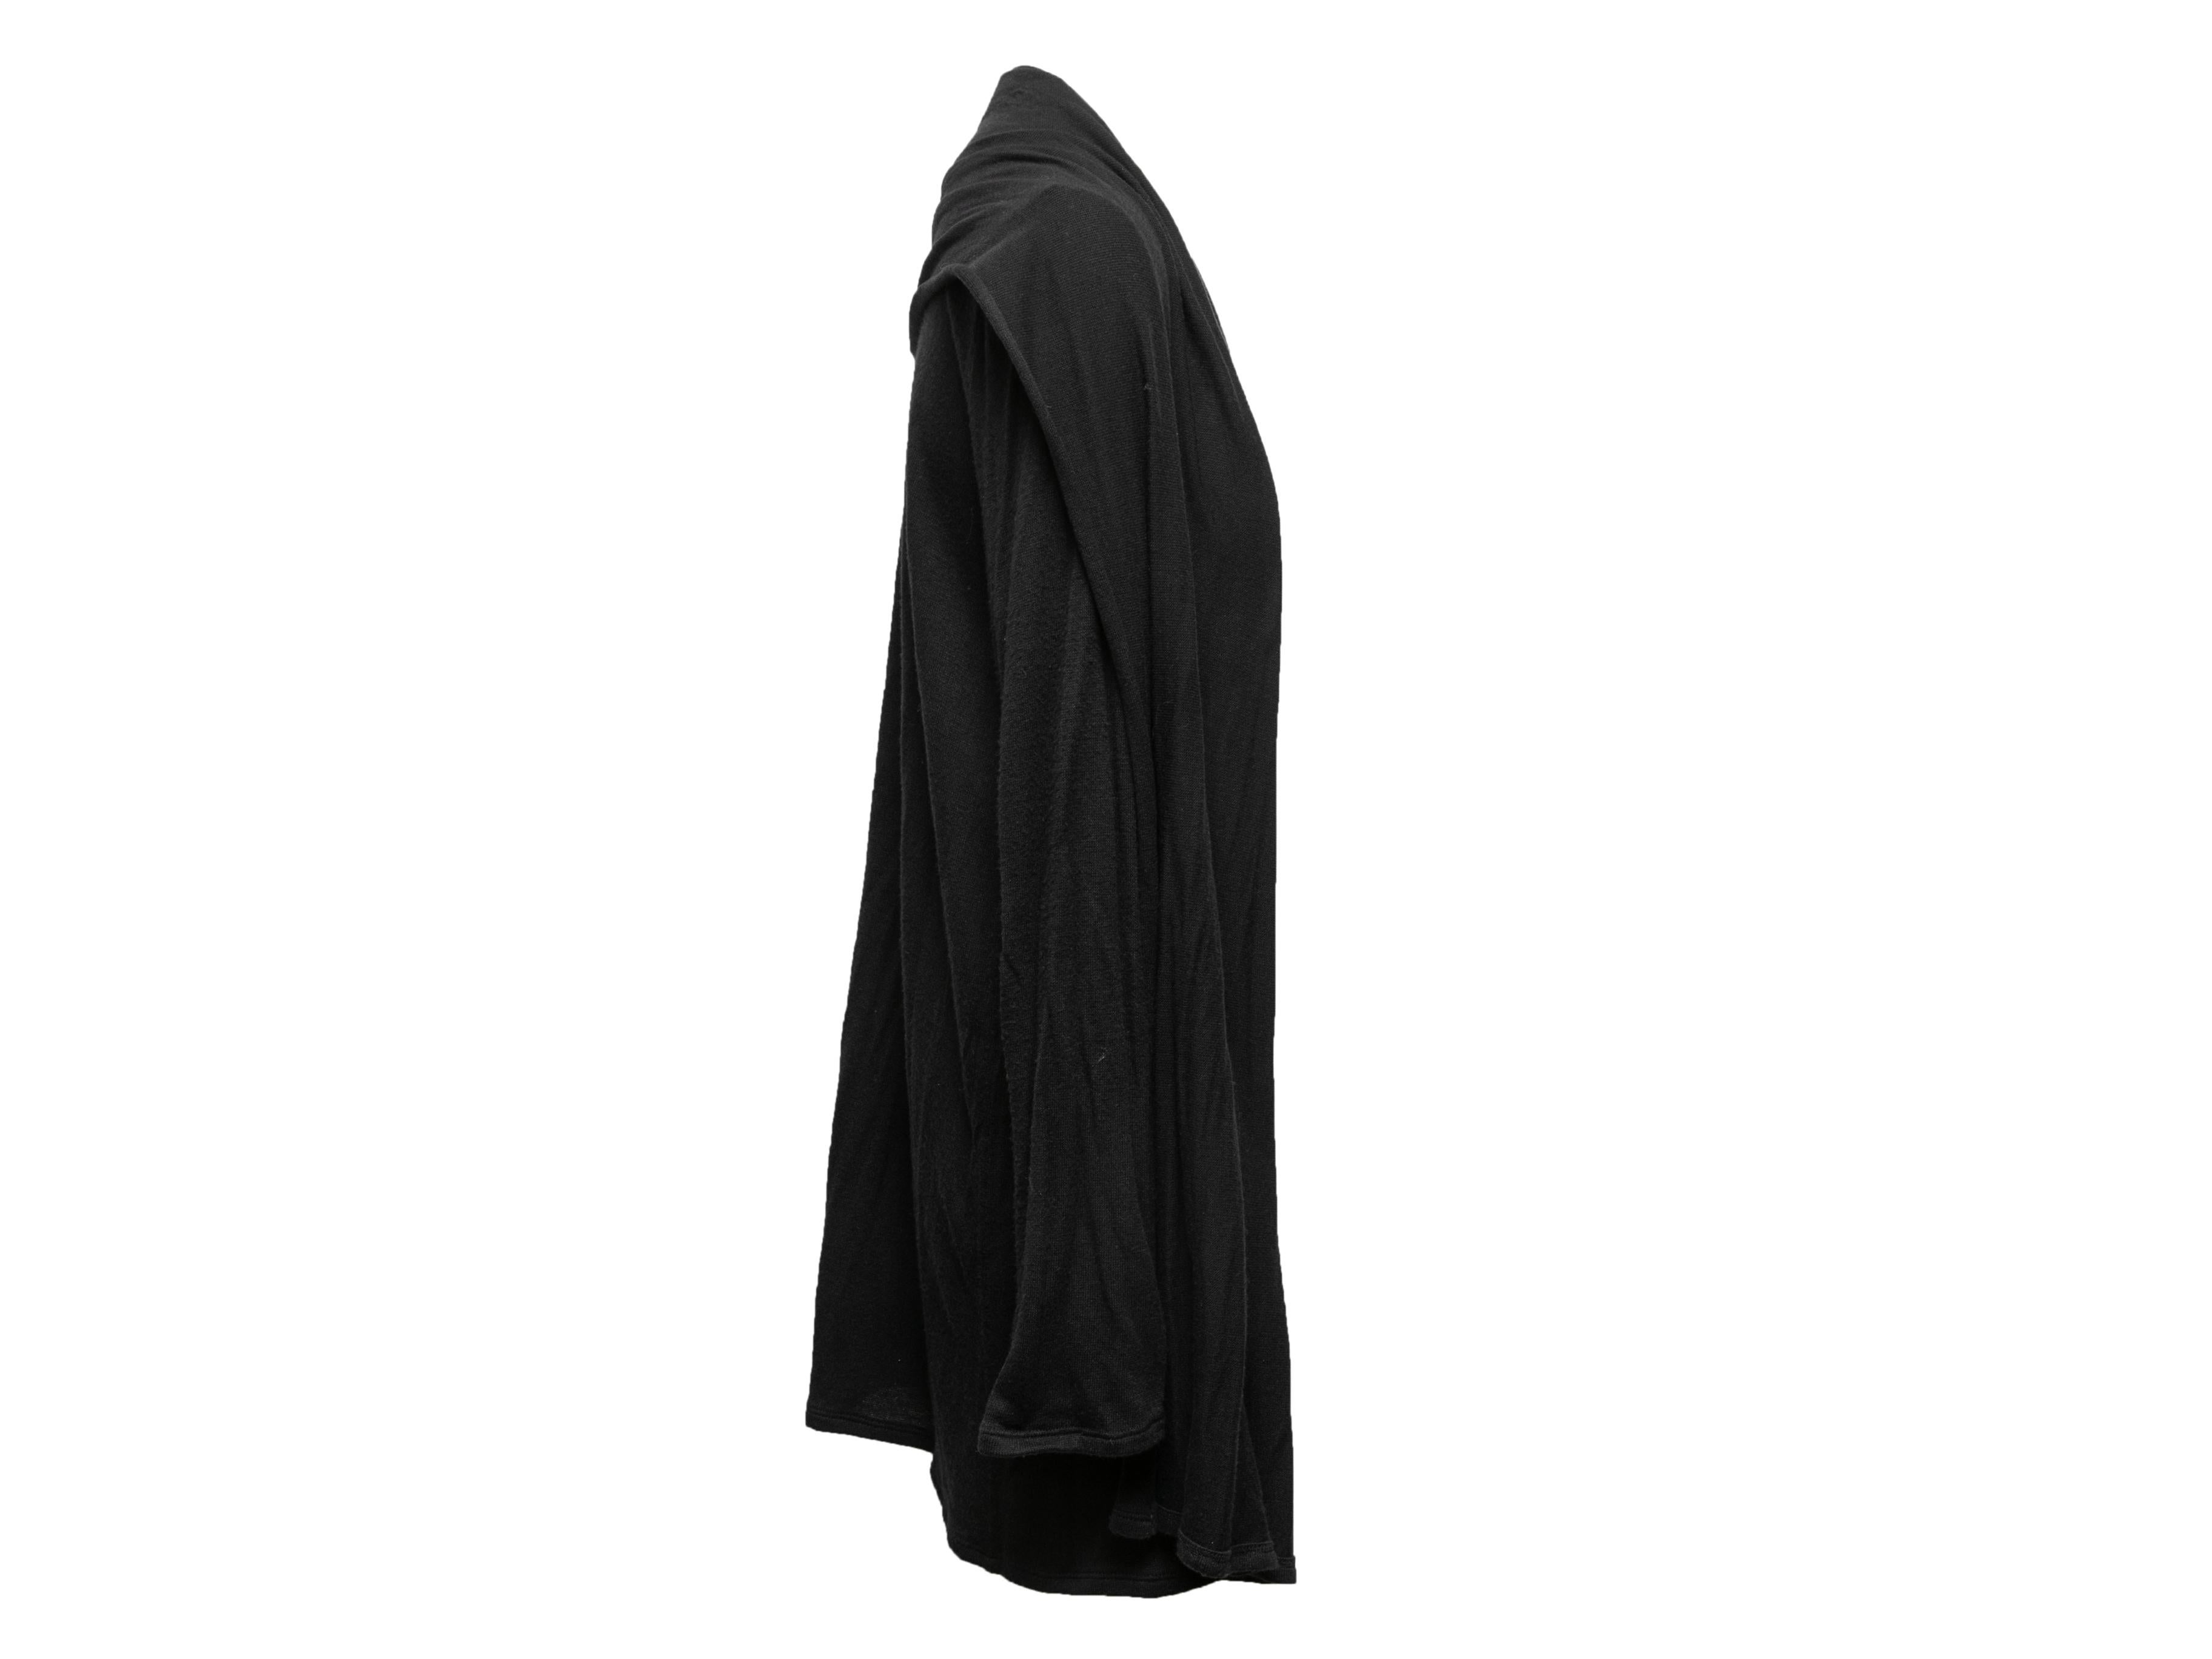 Black longline cardigan by The Row. Long sleeves. Open front. 42